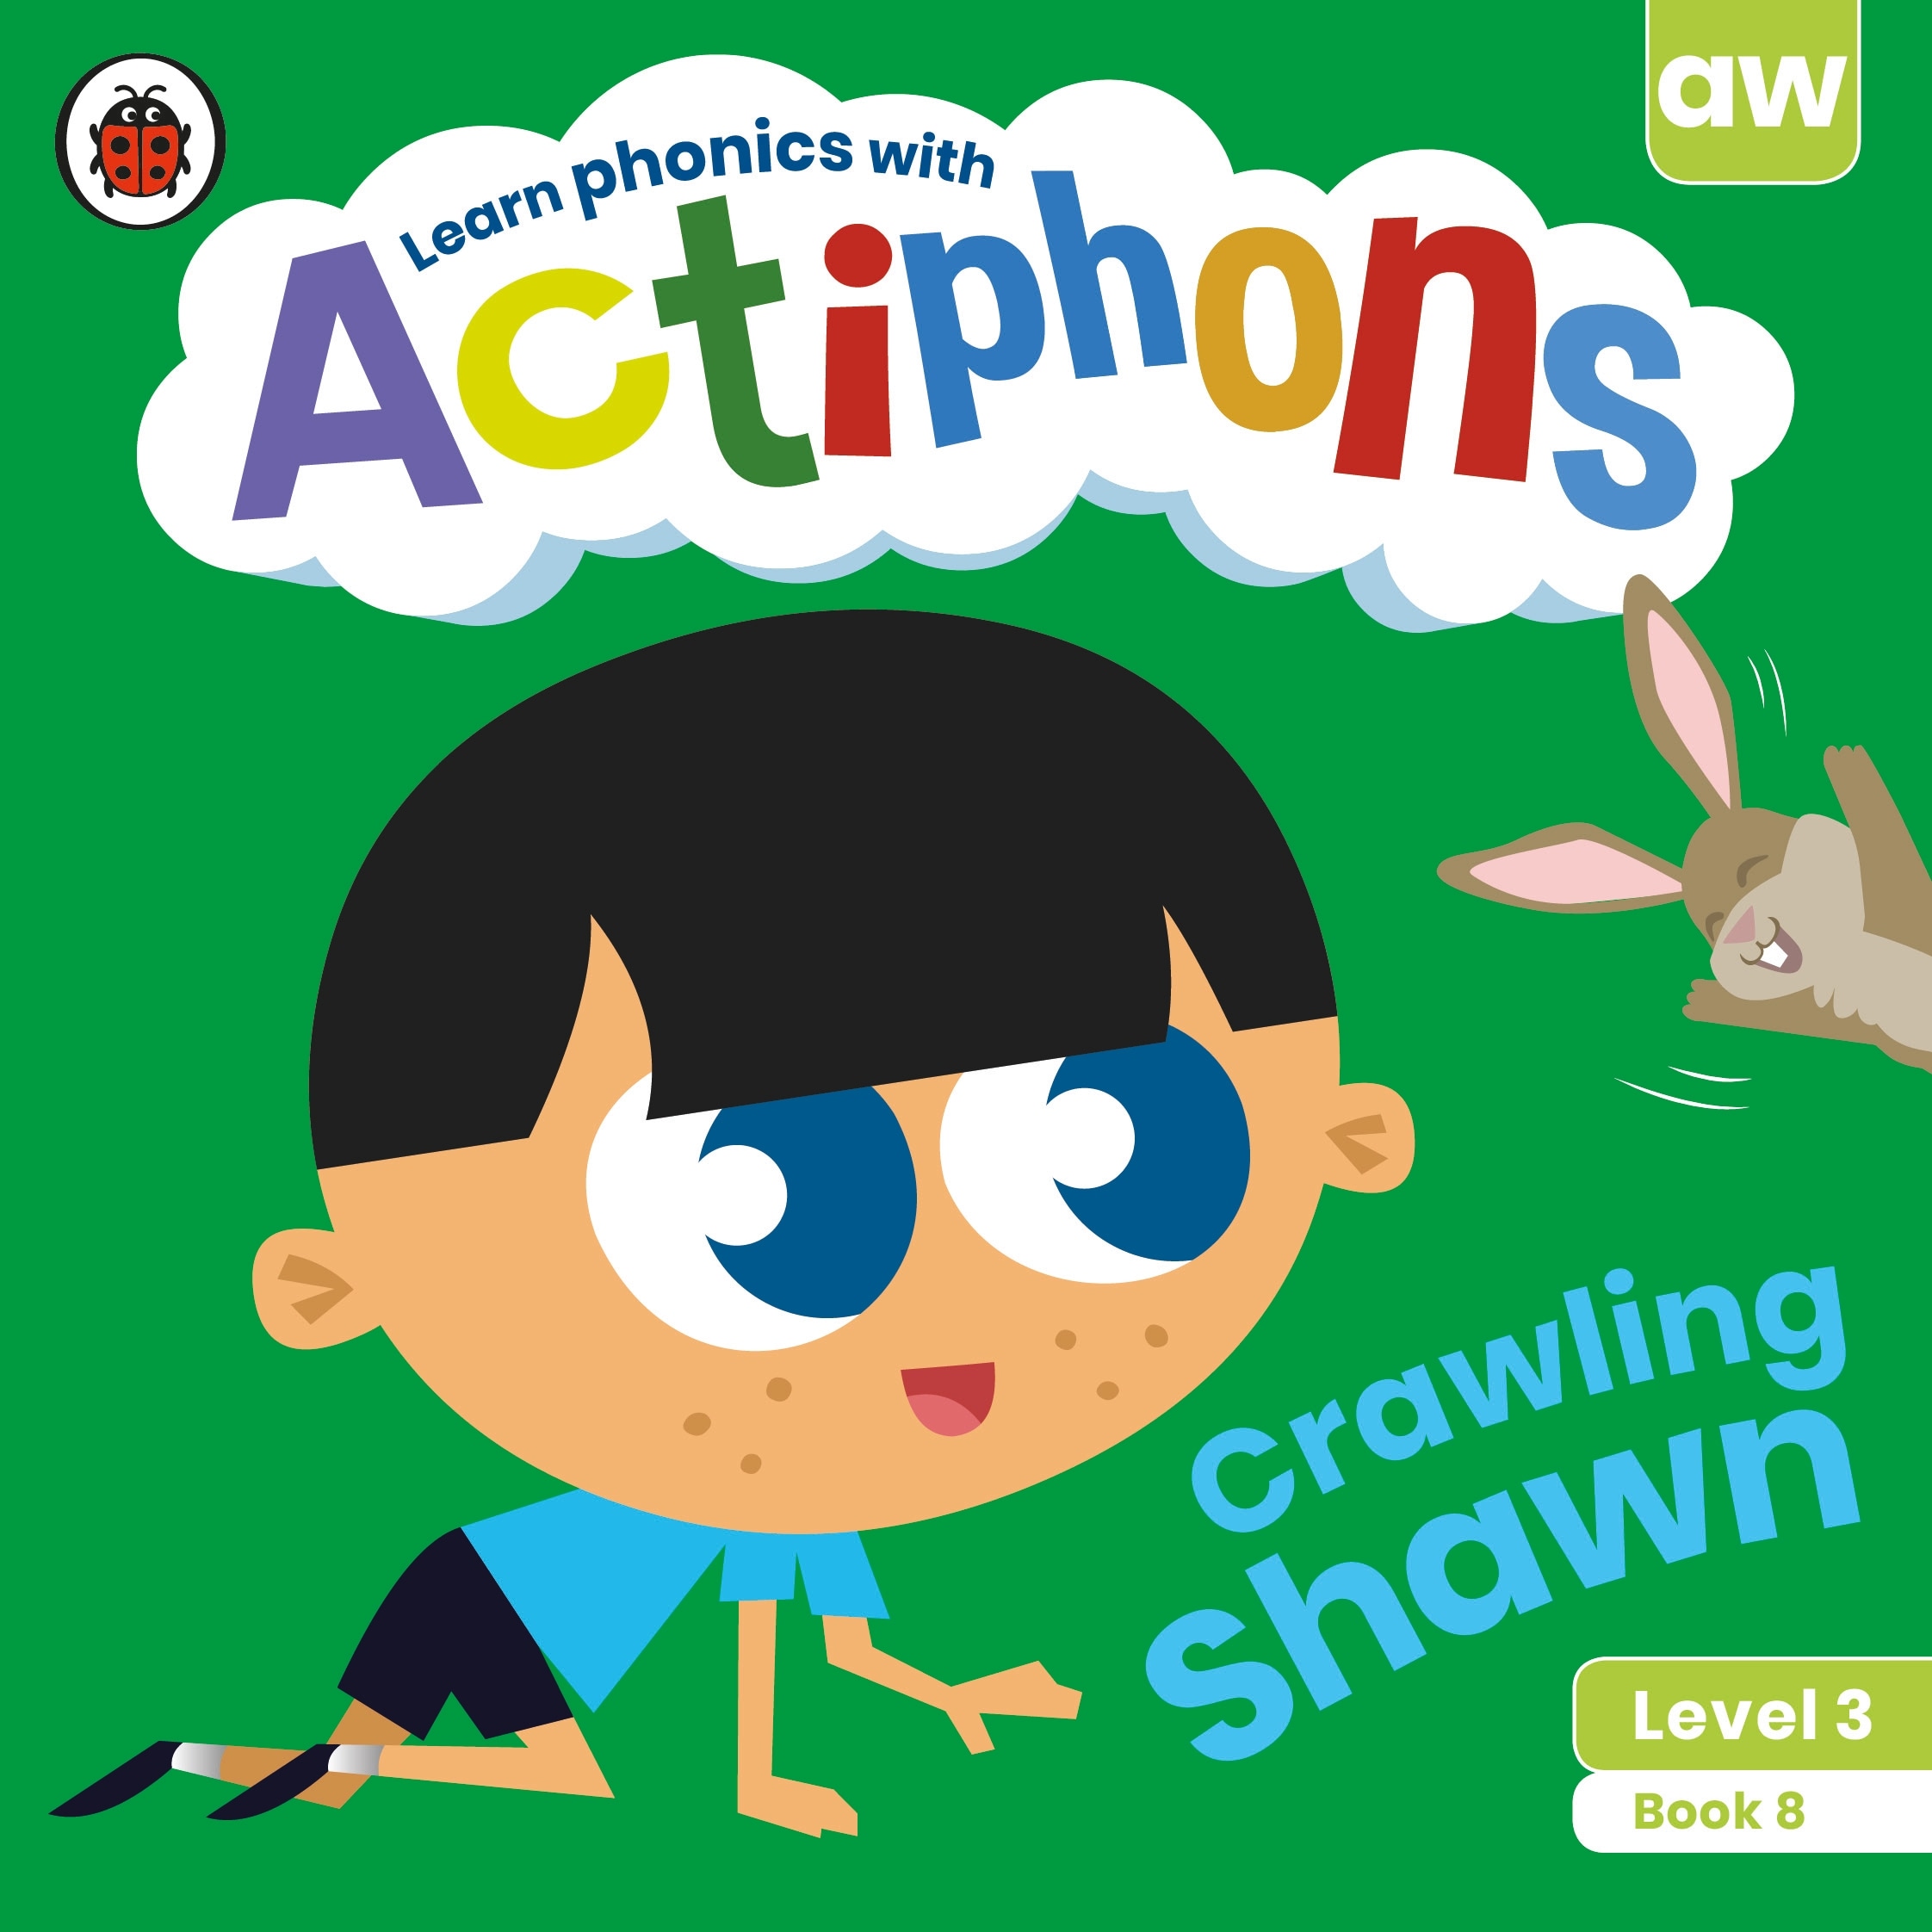 Actiphons Level 3 Book 8 Crawling Shawn